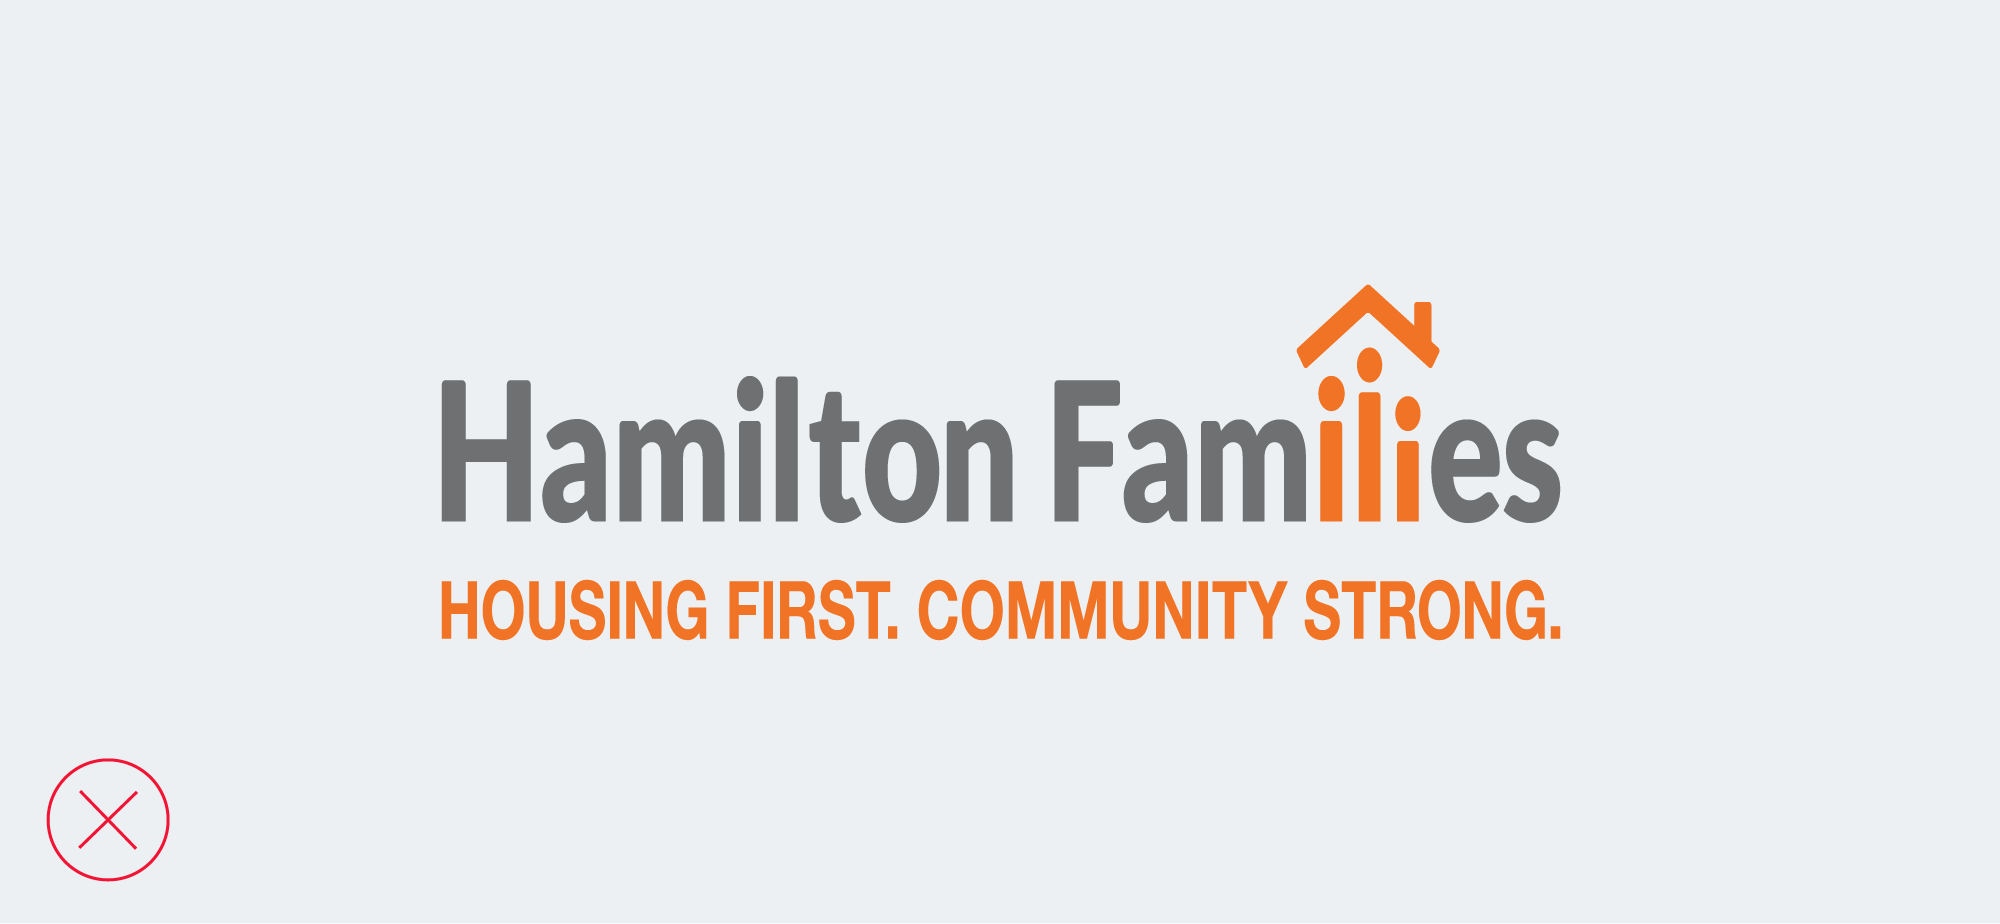 hamilton-families-brand-guidelines_logos-incorrect-usage-01.png